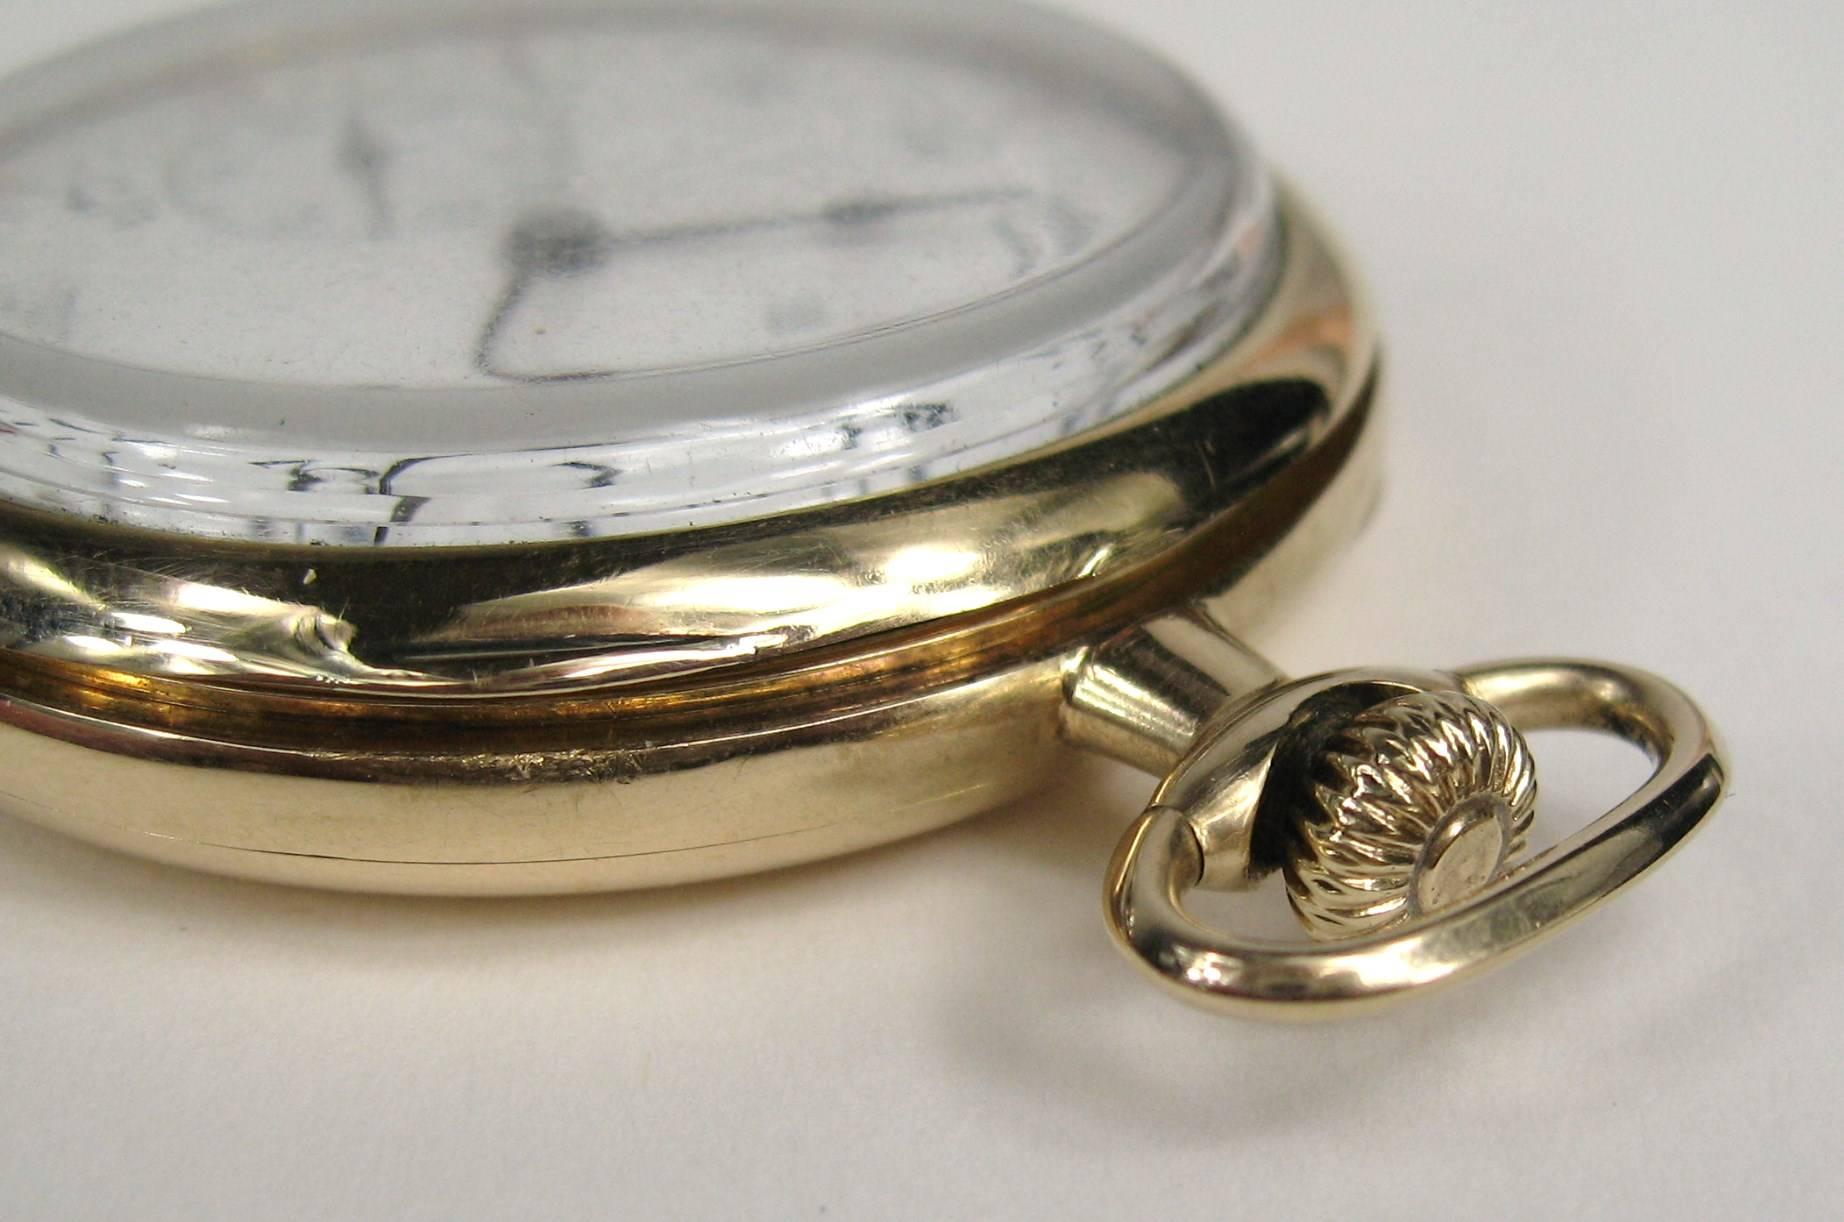 Antique 14K Gold Hamilton 19 Jewel Size 12 Open Face Pocket Watch.  Adjusted 5 positions Hamilton. Run date is 1919. Watch is working. 
Marked on movement Lancaster, Pa. 19 Jewels Adjusted 5 Positions Safety Pinion. Watch measures 59.58 mm top to